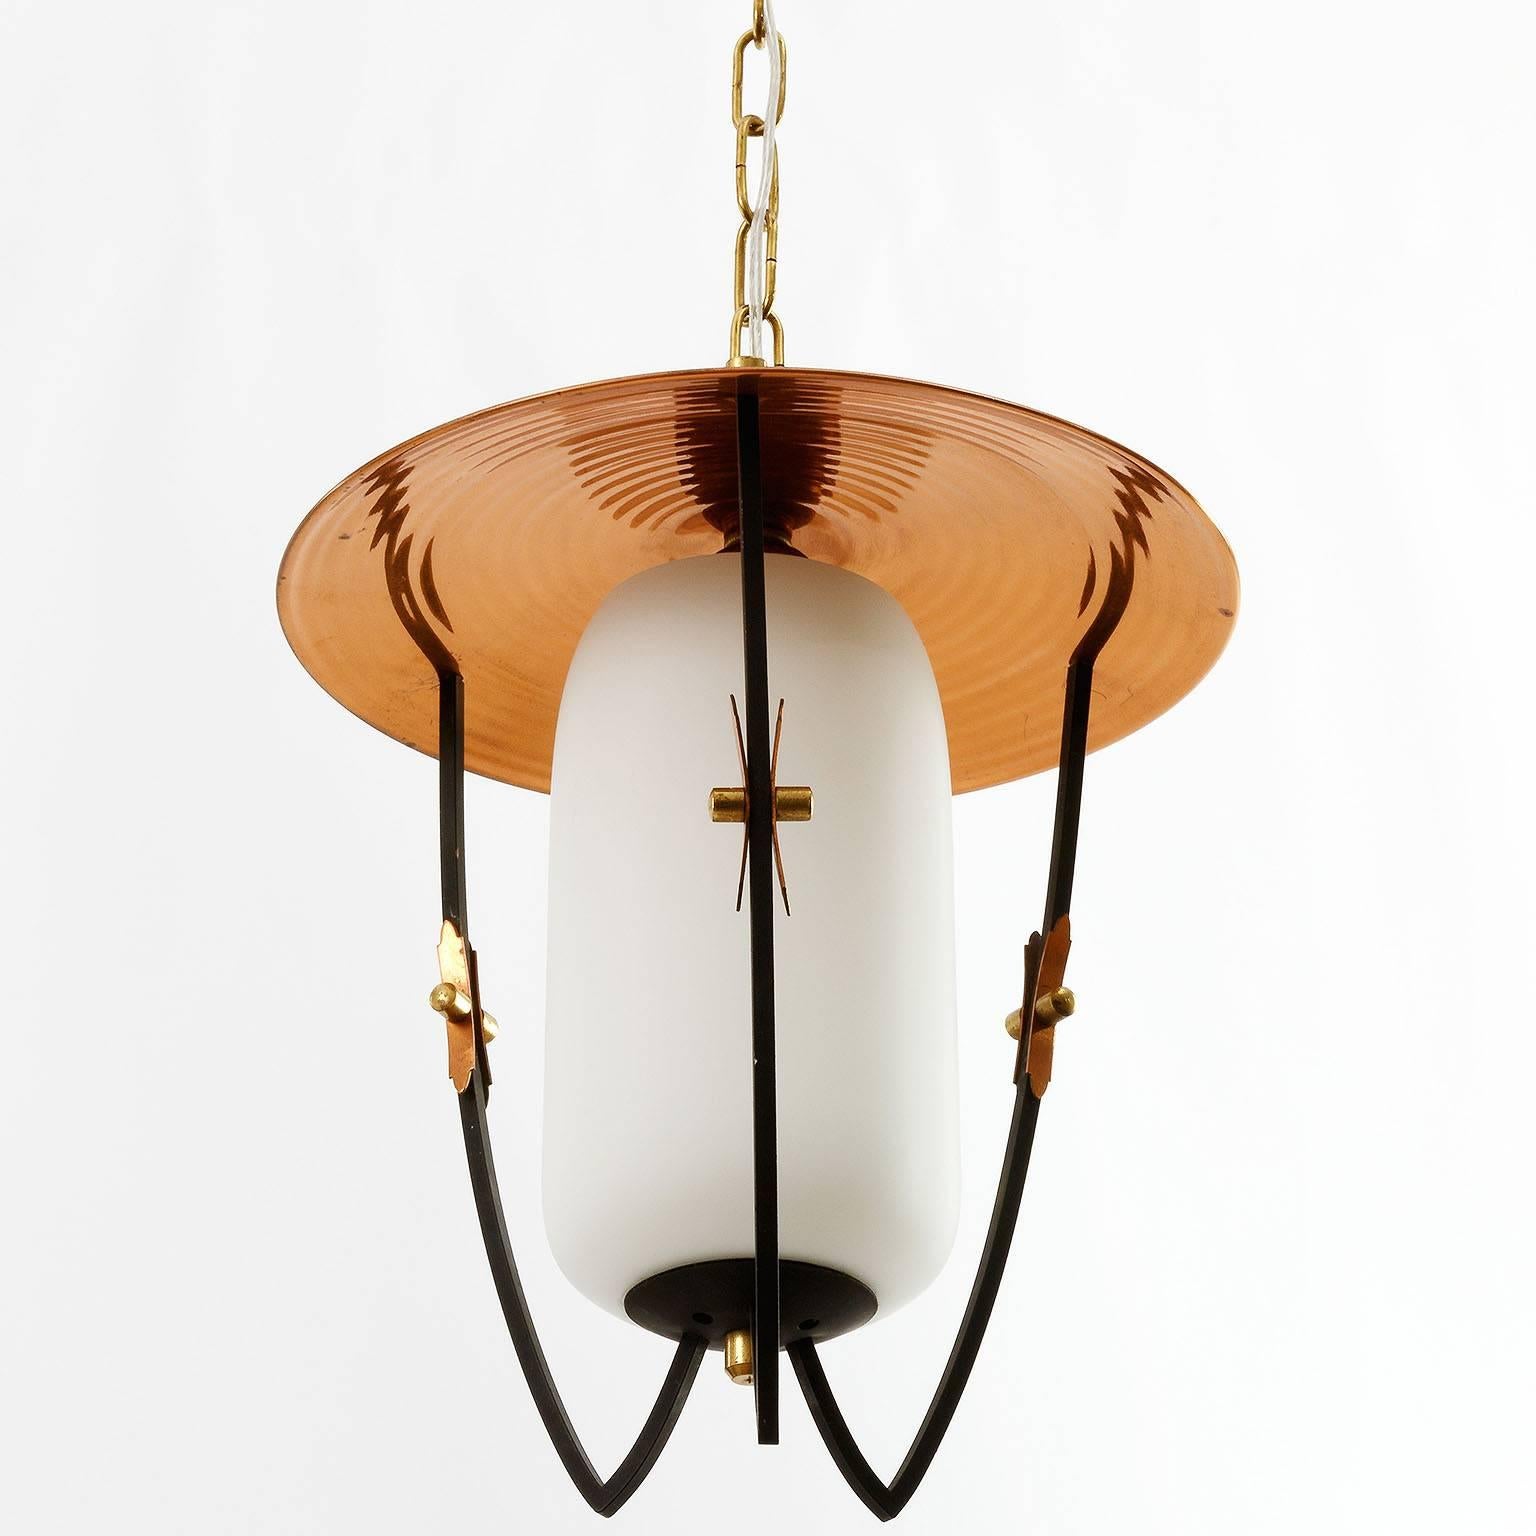 A set of three nice lanterns or pendant lights by Rupert Nikoll, Austria, manufactured in midcentury, circa 1960 (late 1950s or early 1960s).
There is lovely patina on brass and copper. 
A nice mixture of materials and colors: white, black, brass,